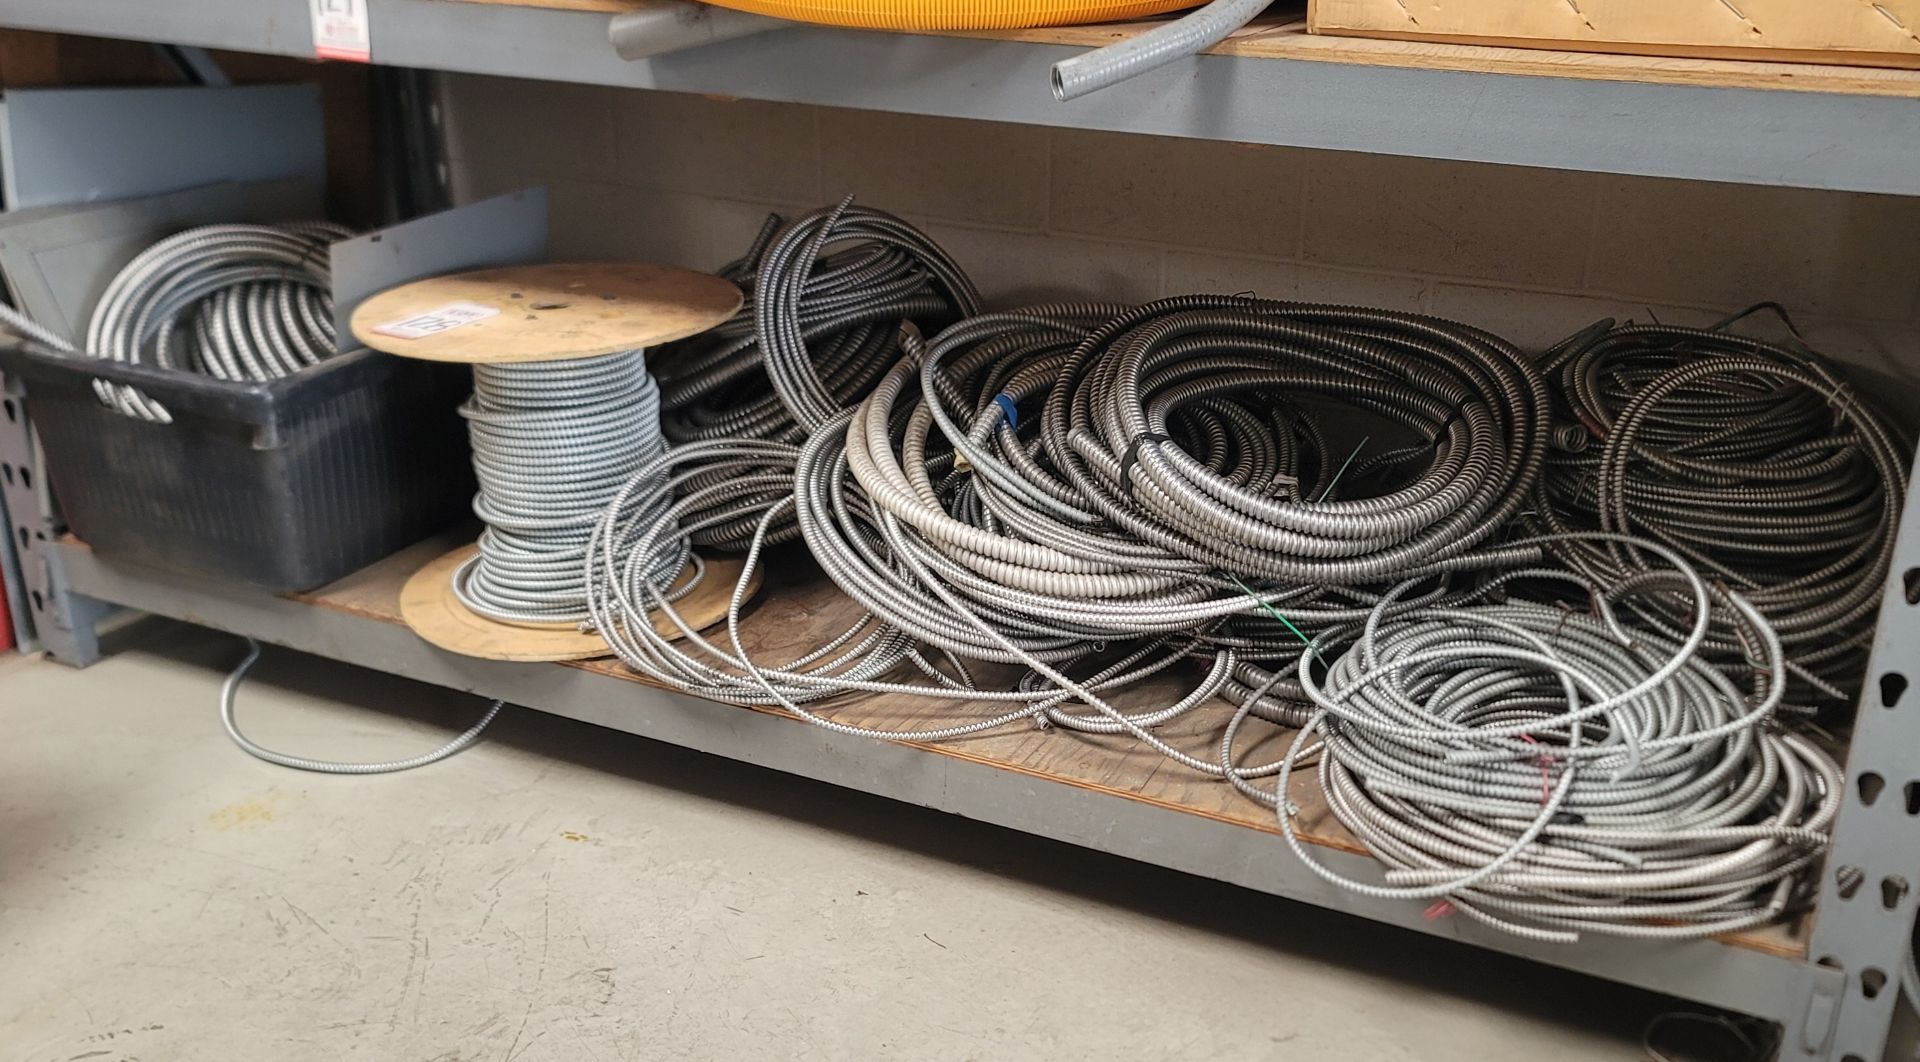 LOT - CONTENTS ONLY OF (1) SHELF, TO INCLUDE: FLEX CONDUIT